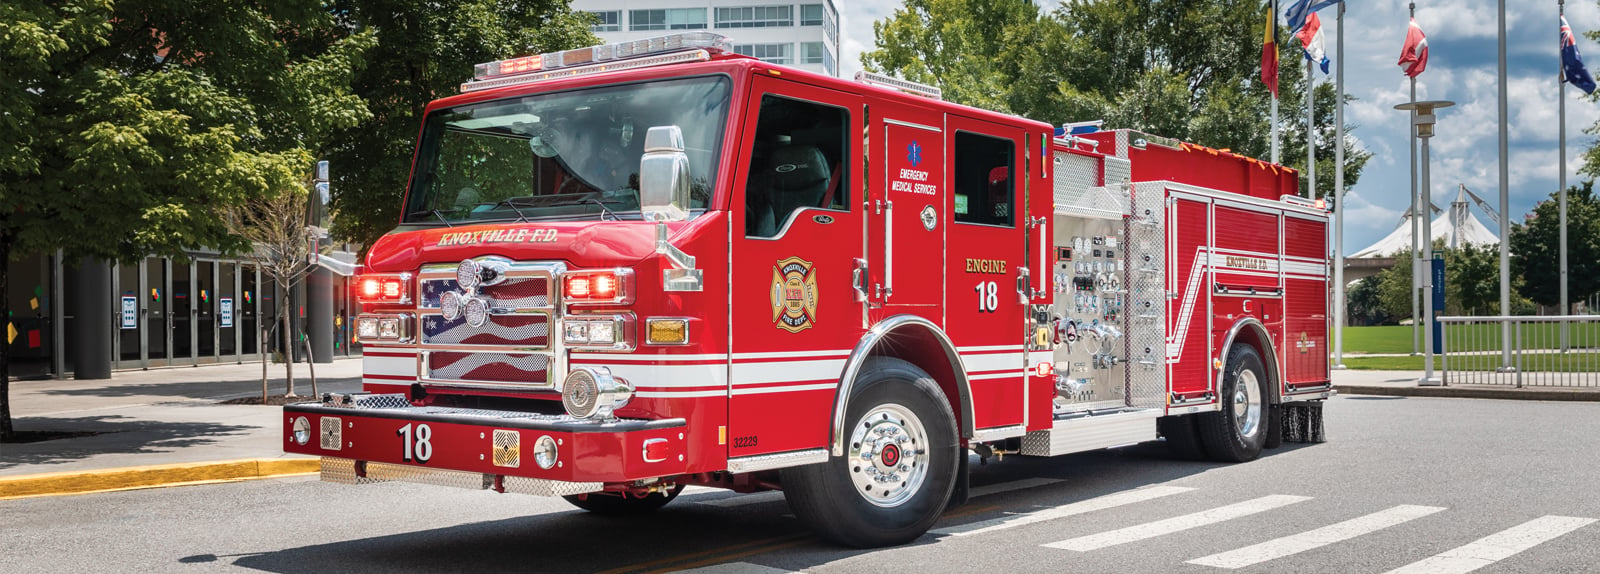 Types Of Fire Trucks: An Overview And Comparison